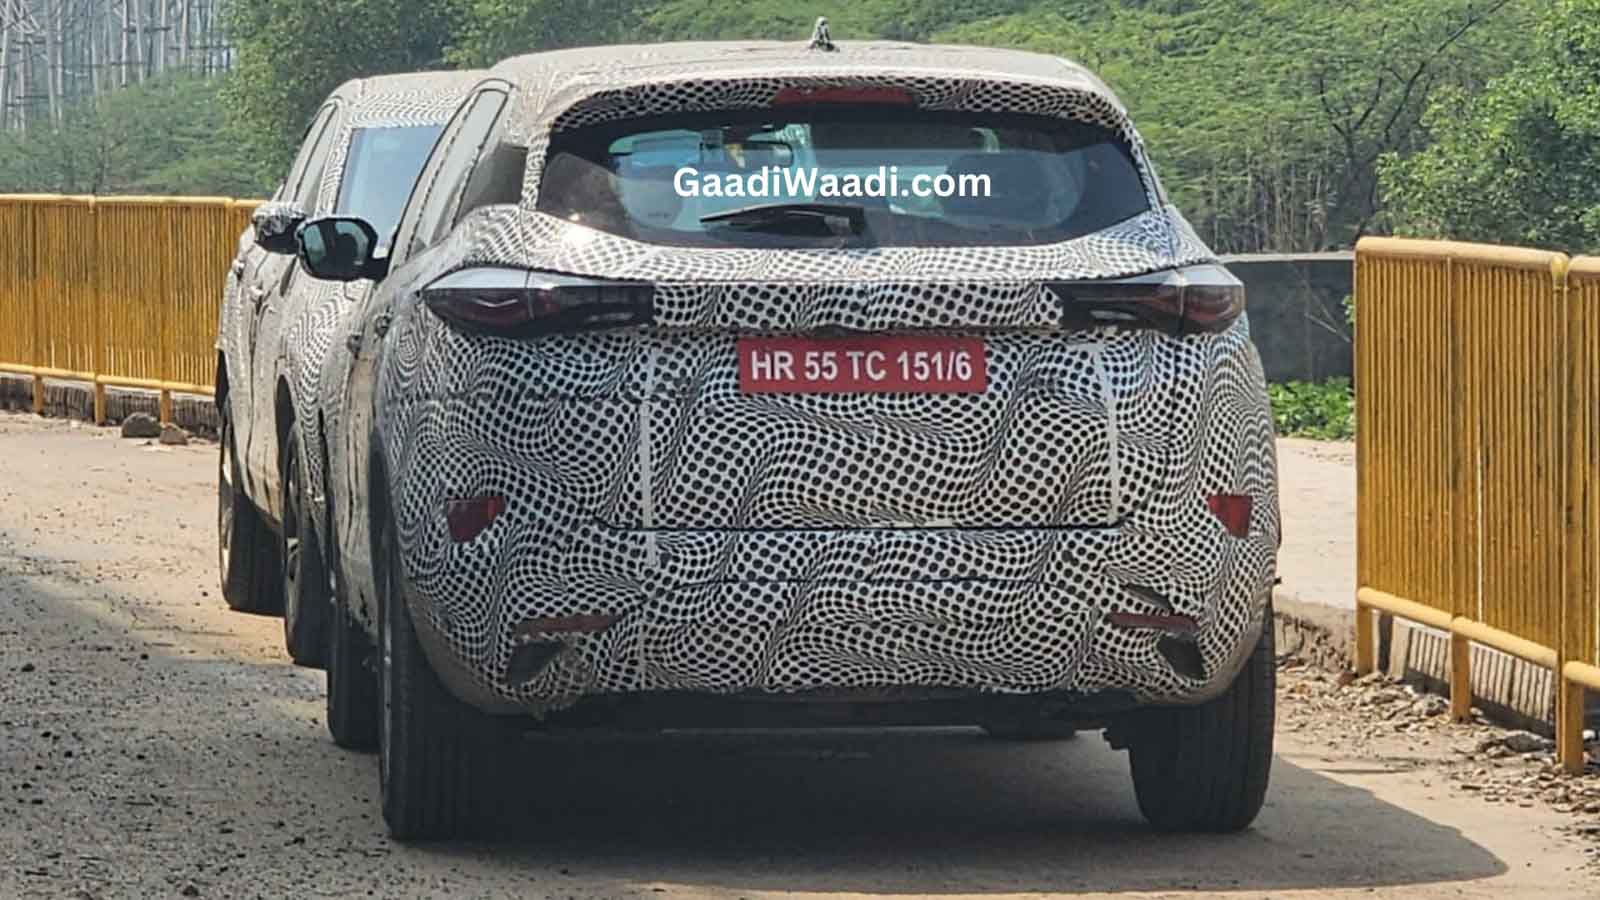 2023 Tata Harrier SUV Spotted Again - Interiors Fully Revealed! - photograph